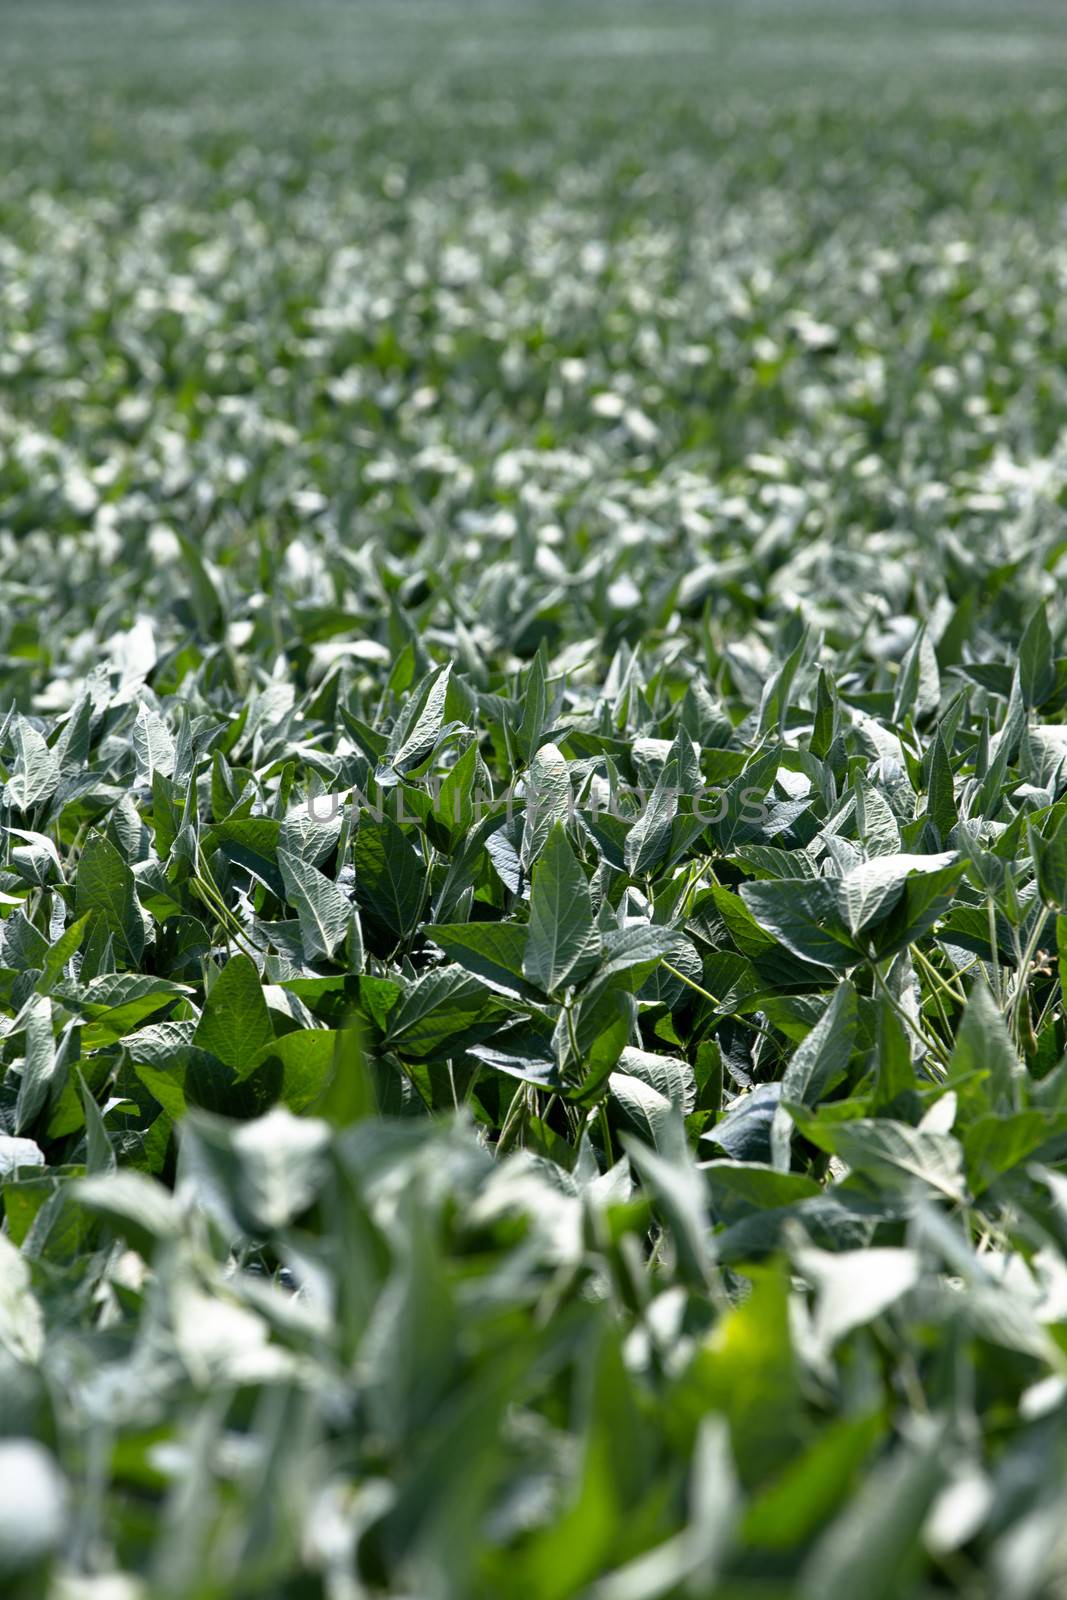 Background image of a crop of lush green vegetables growing in an agricultural field, with shallow dof